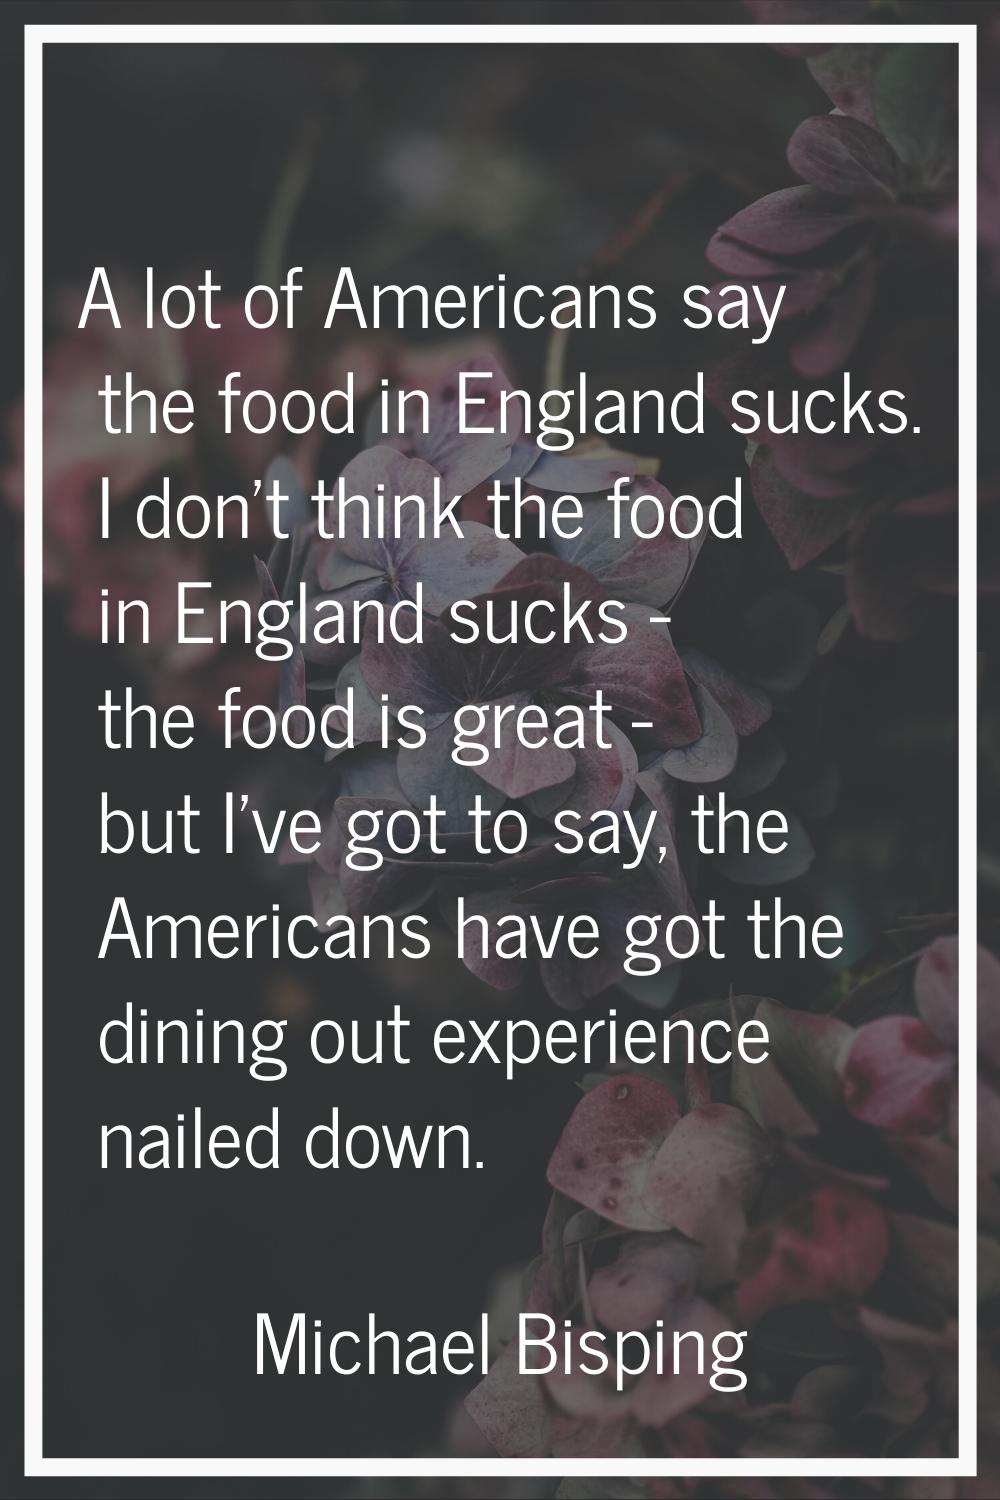 A lot of Americans say the food in England sucks. I don't think the food in England sucks - the foo